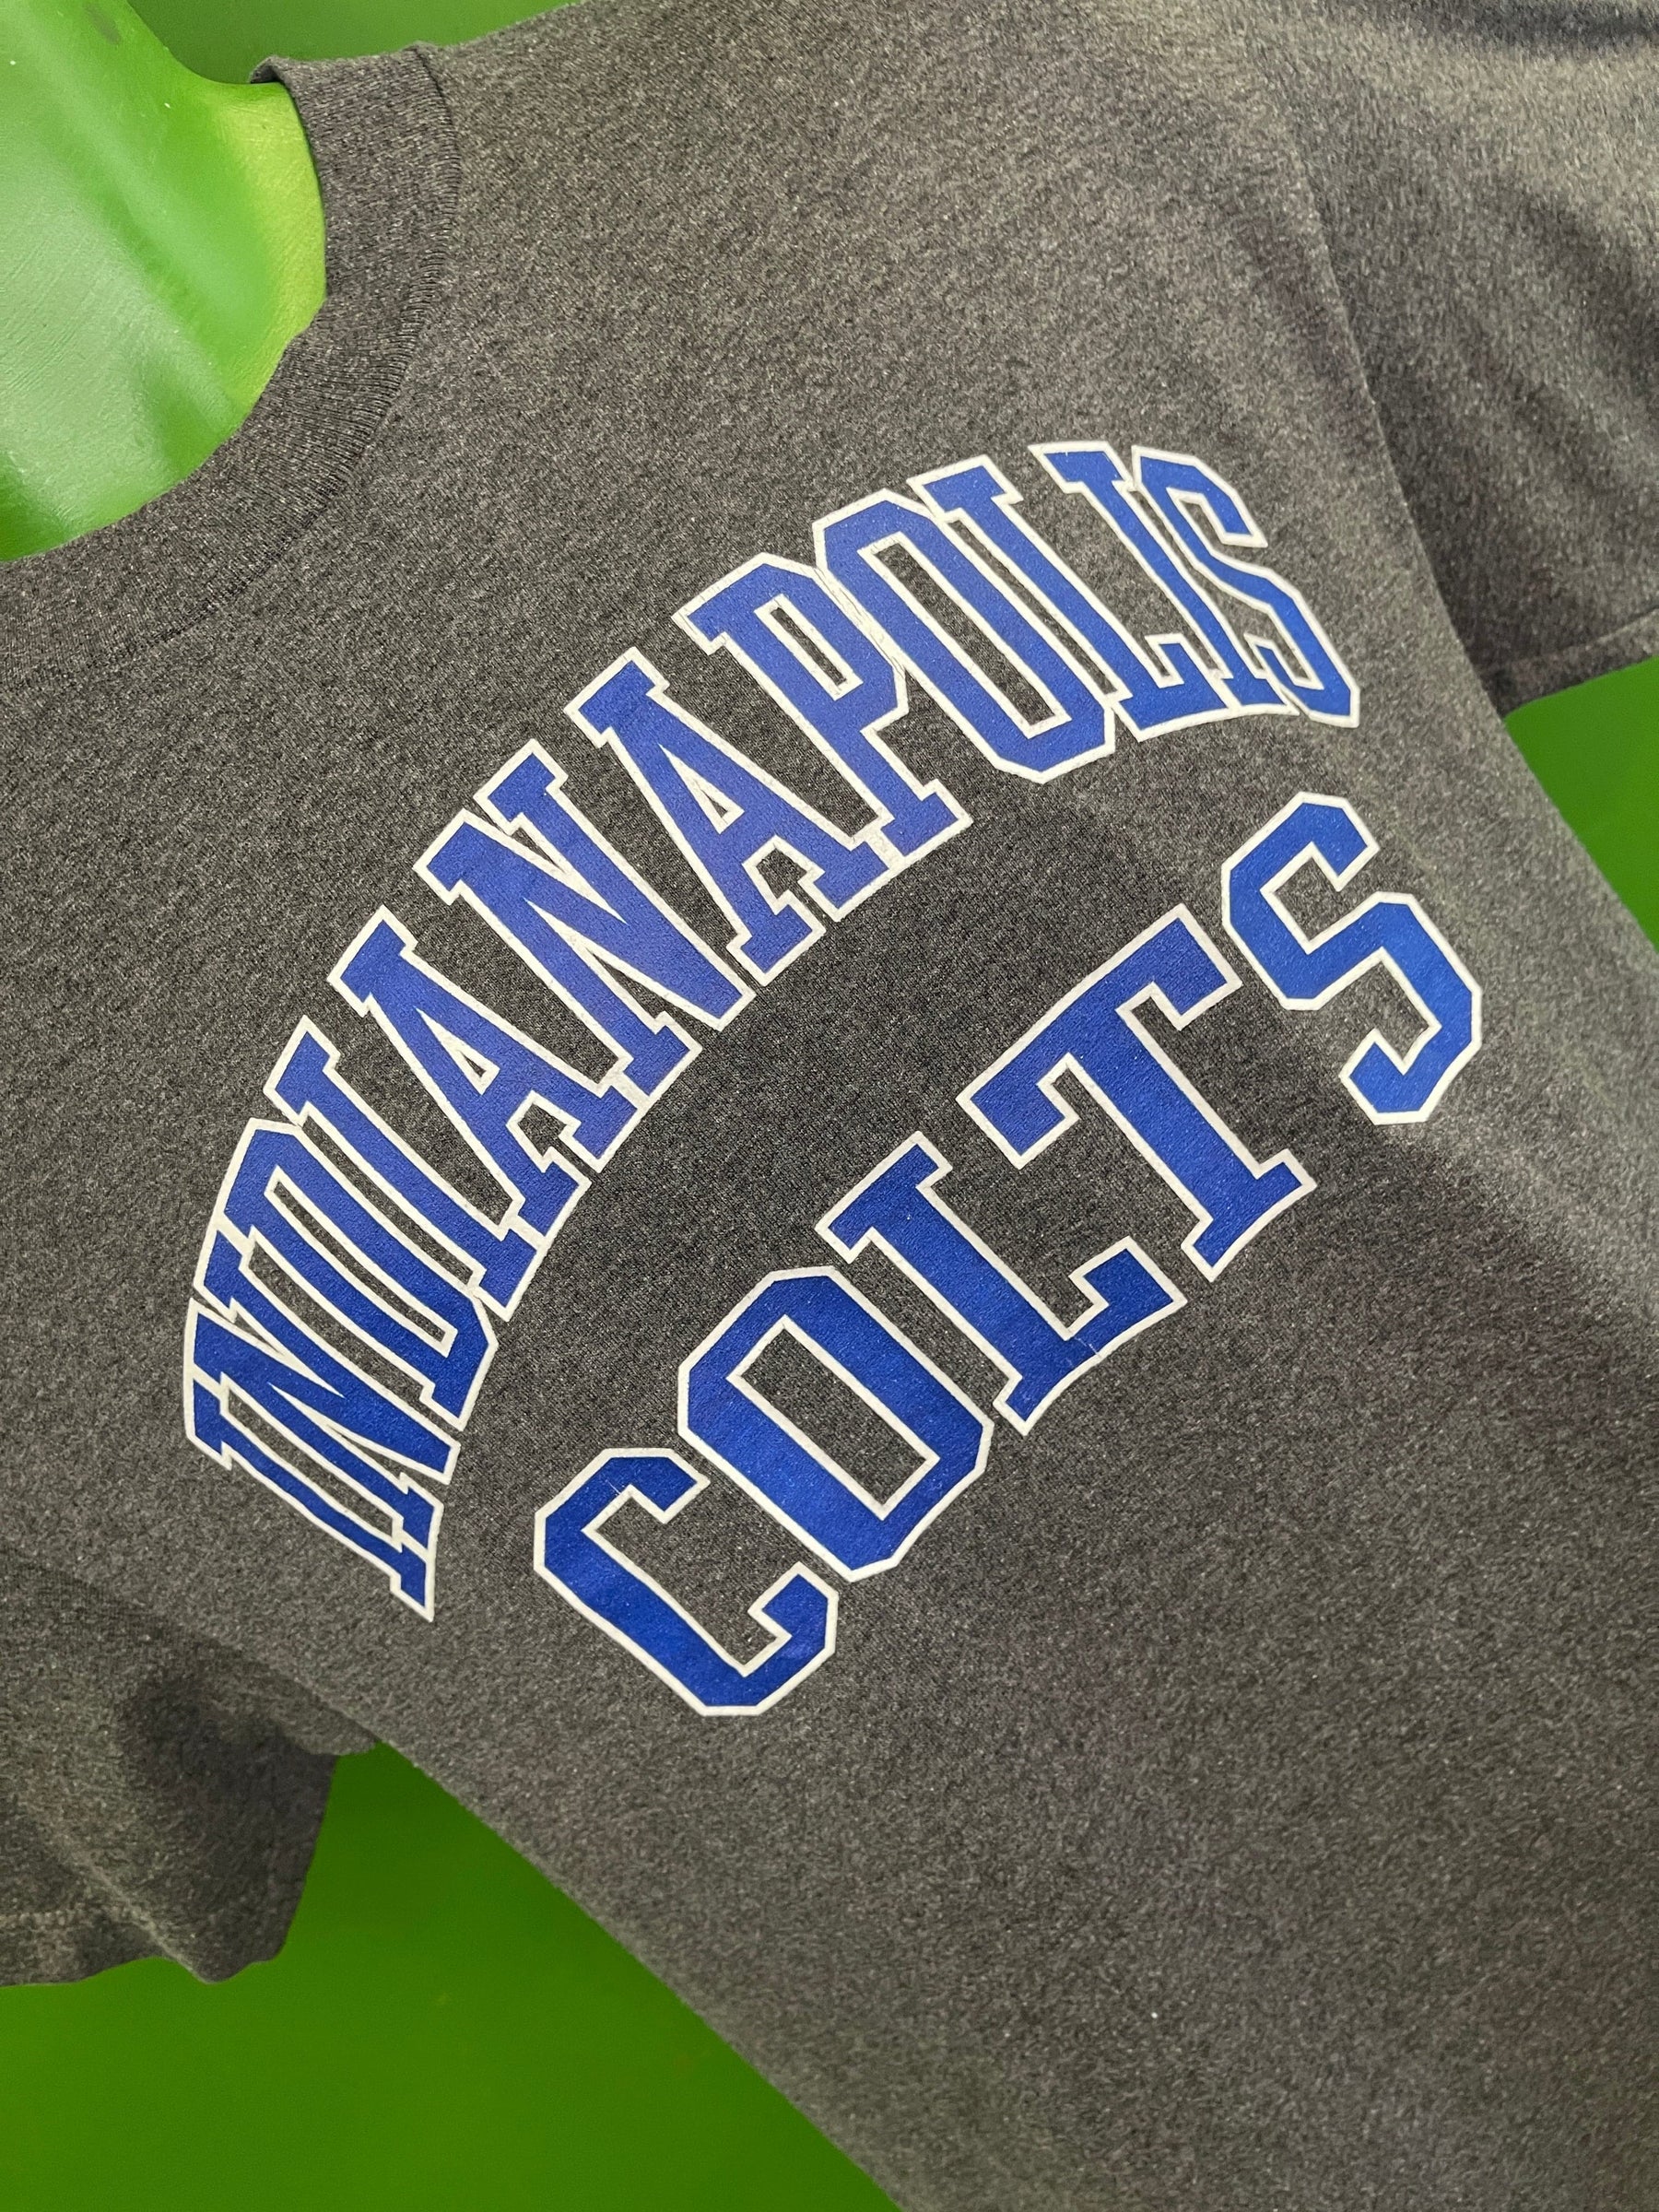 NFL Indianapolis Colts Heathered Grey Spellout T-Shirt Men's Medium